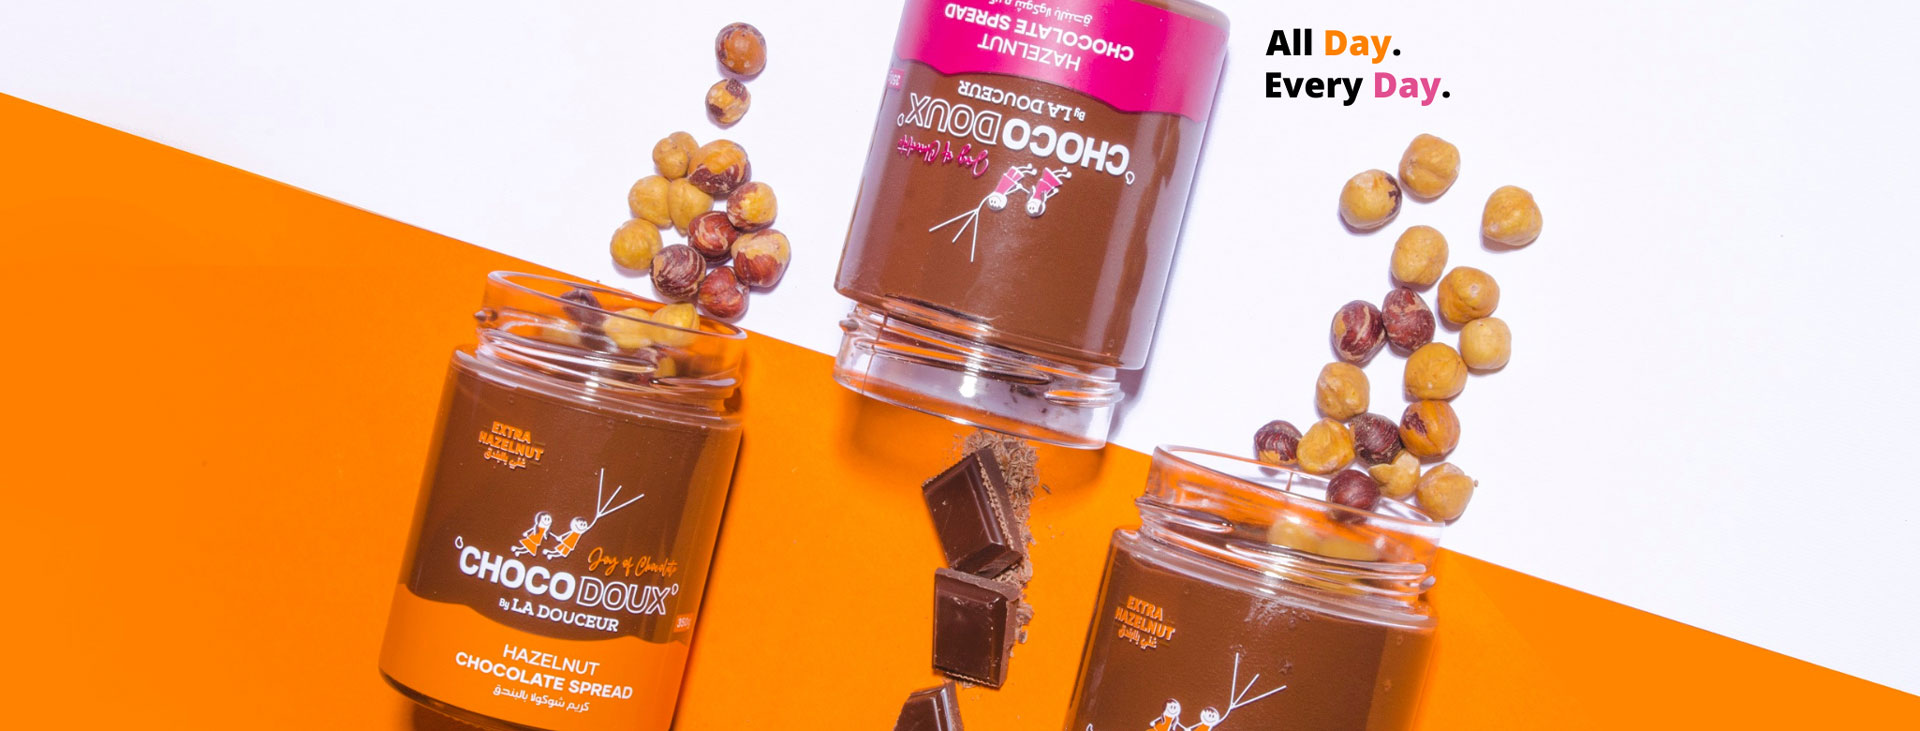 Discover Chocodoux products